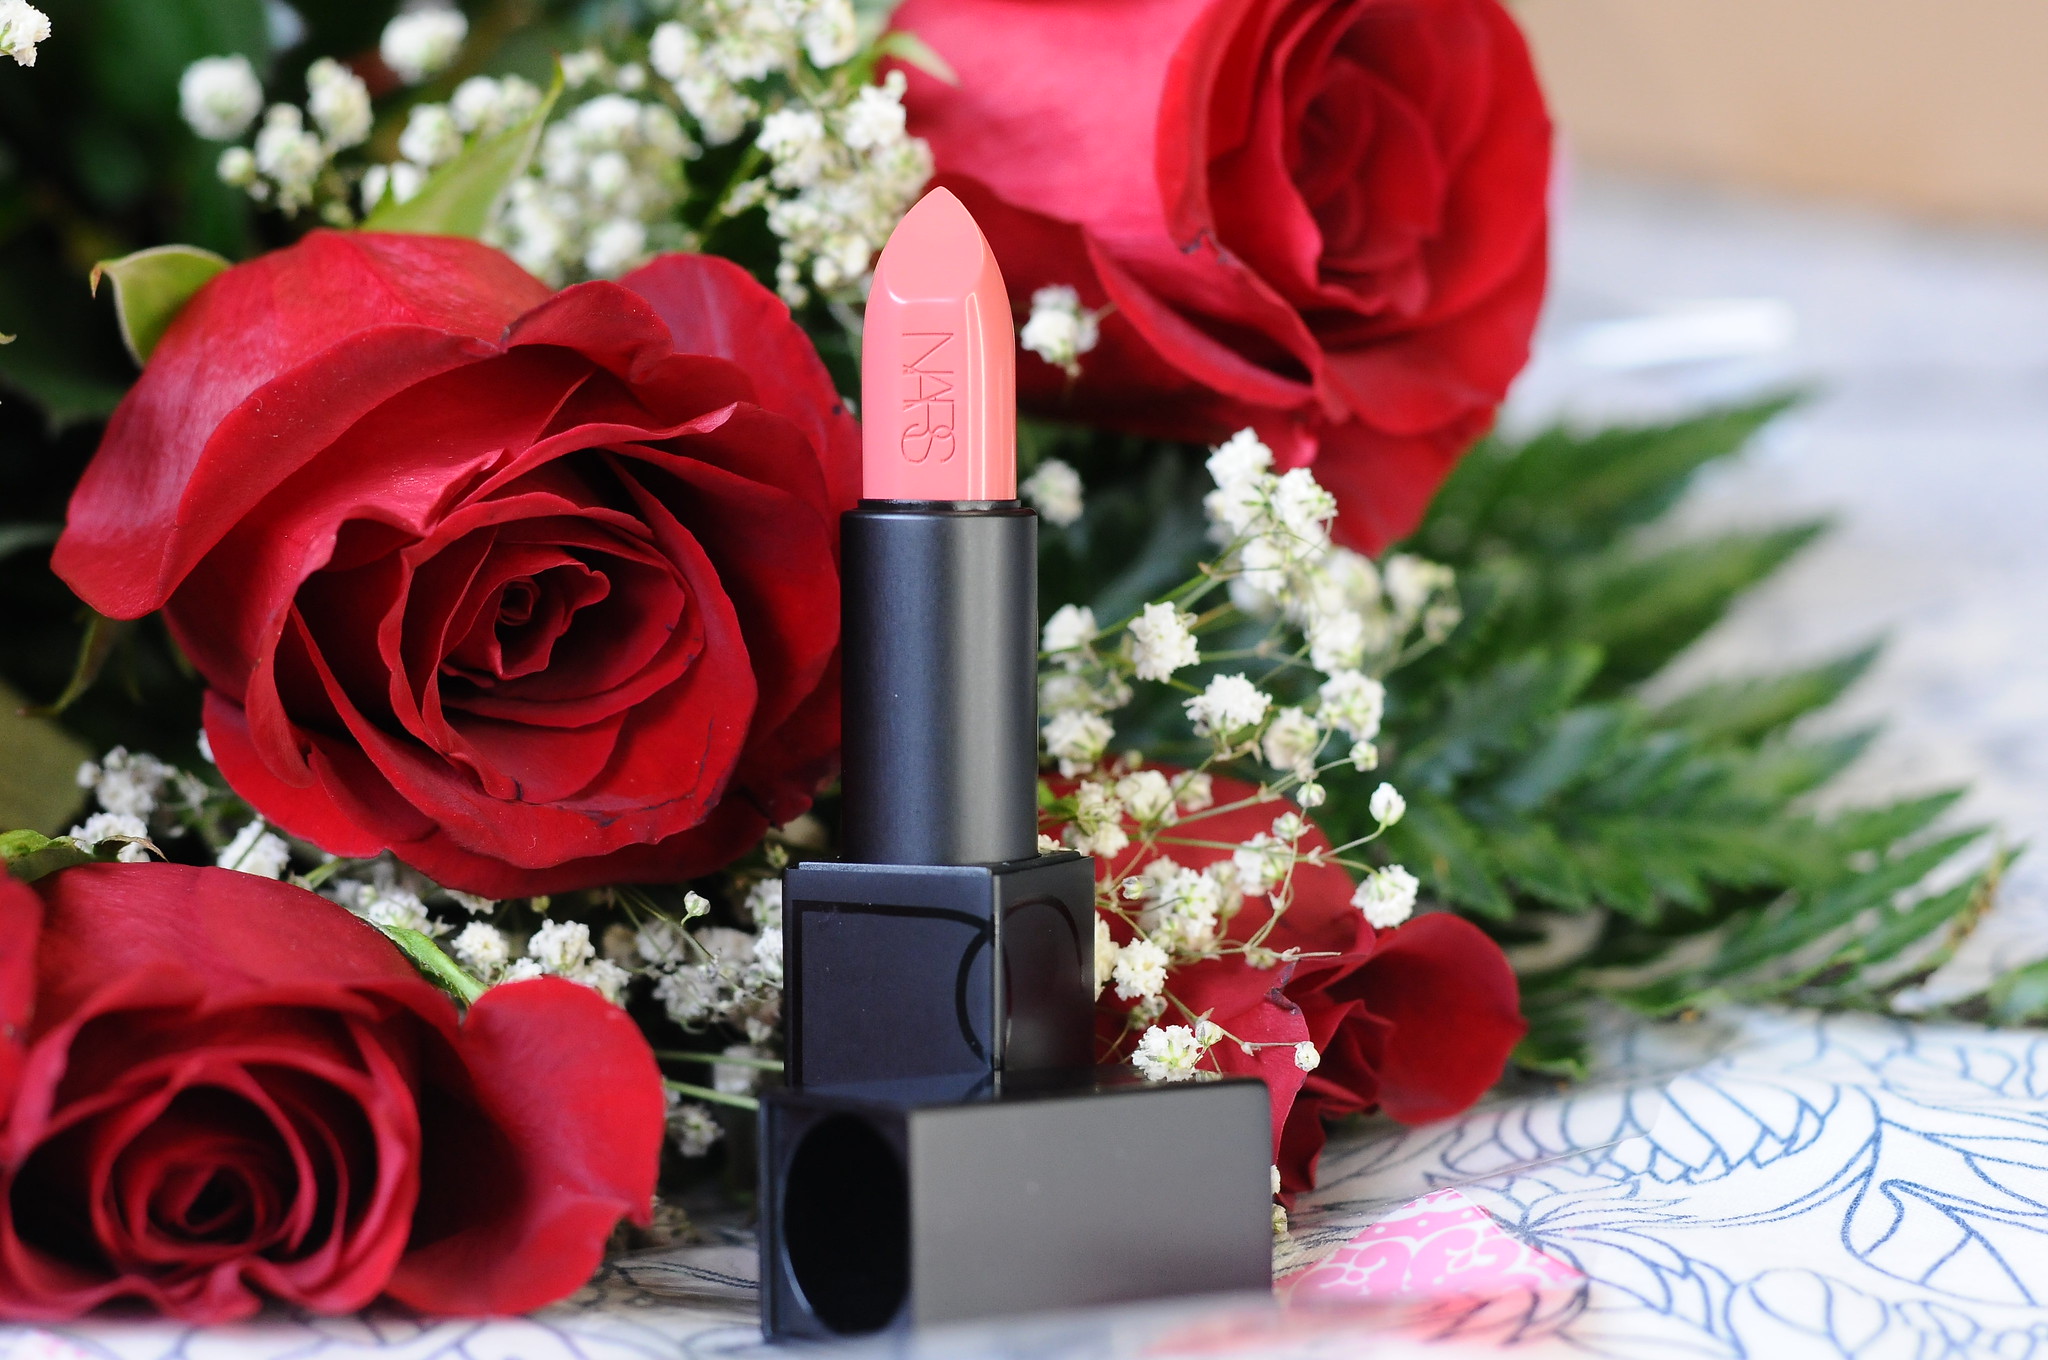 NARS Audacious Lipstick in Brigitte review and swatches - Ingrid Hughes  Beauty